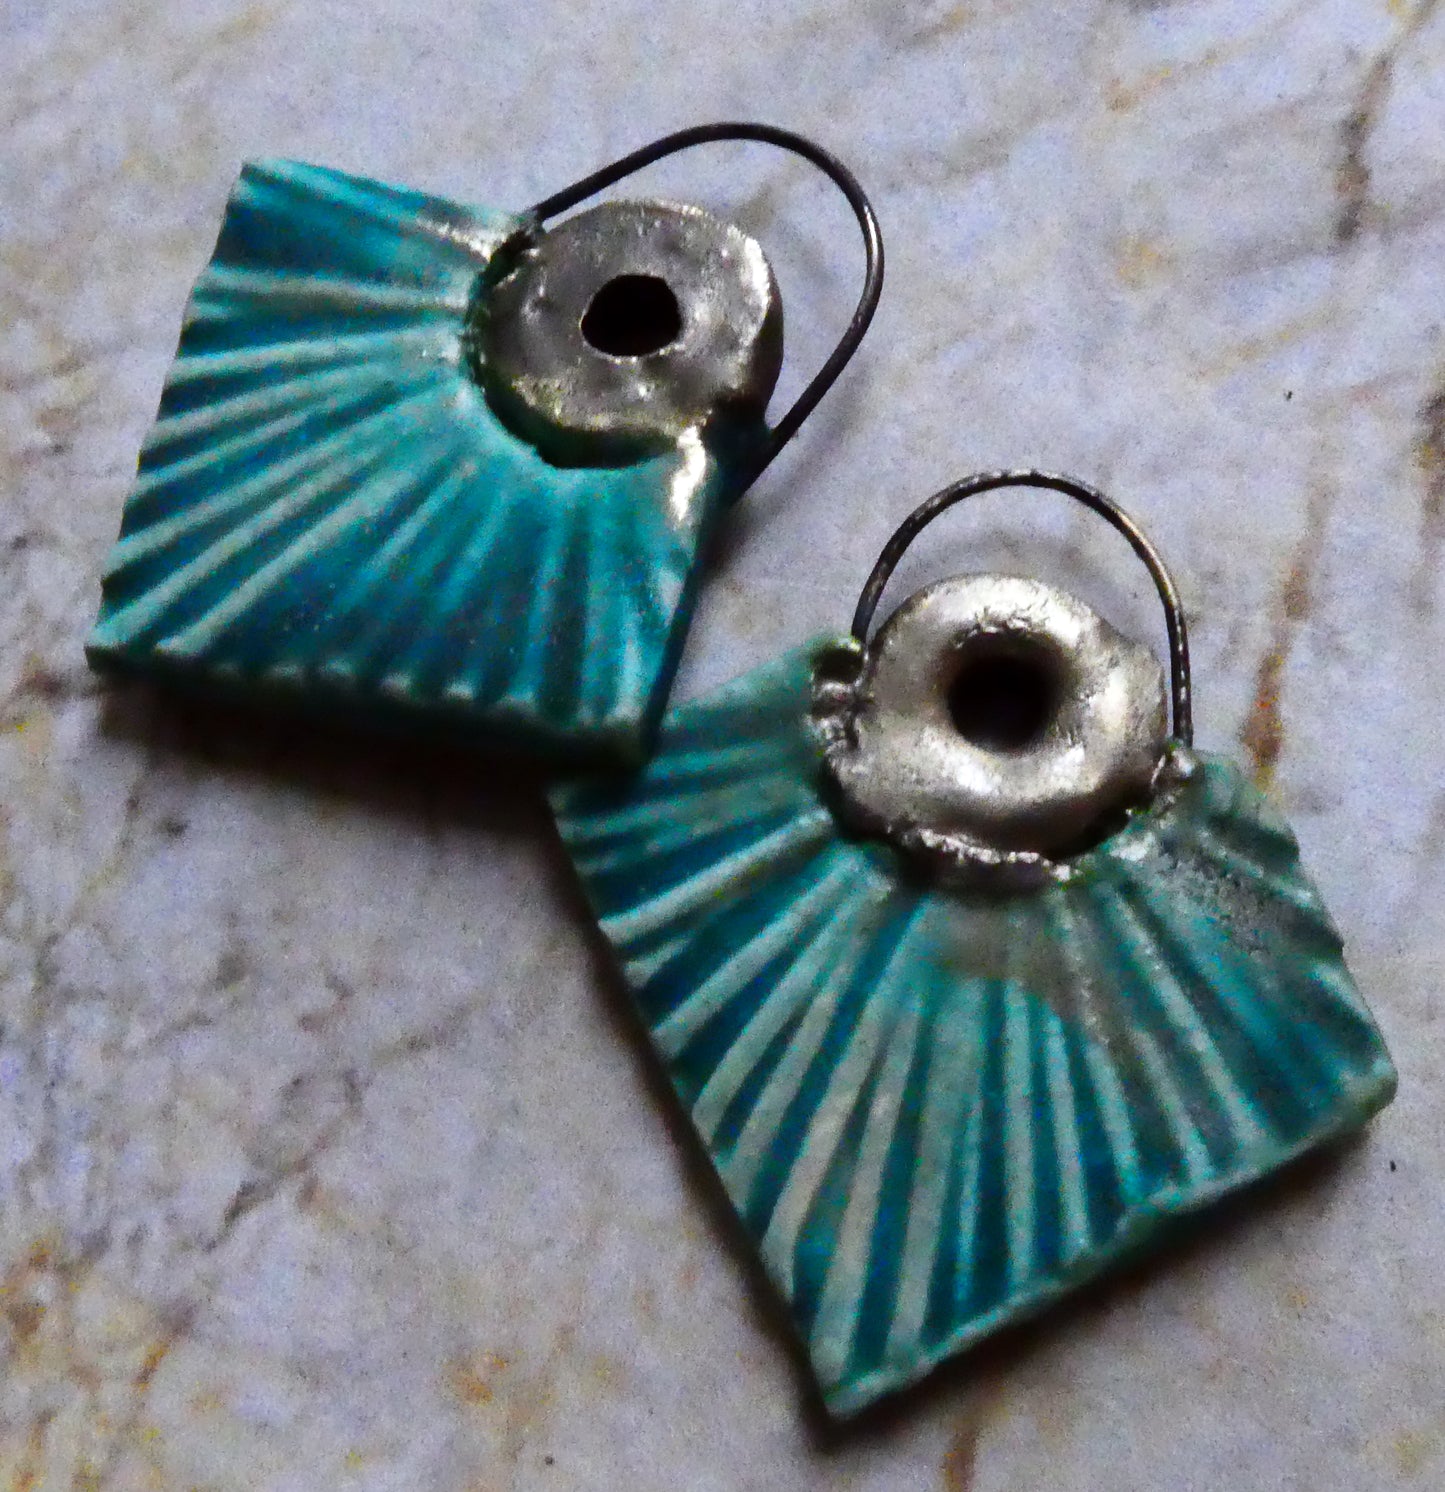 Ceramic Textured Fan Earring Charms -Antique Turquoise